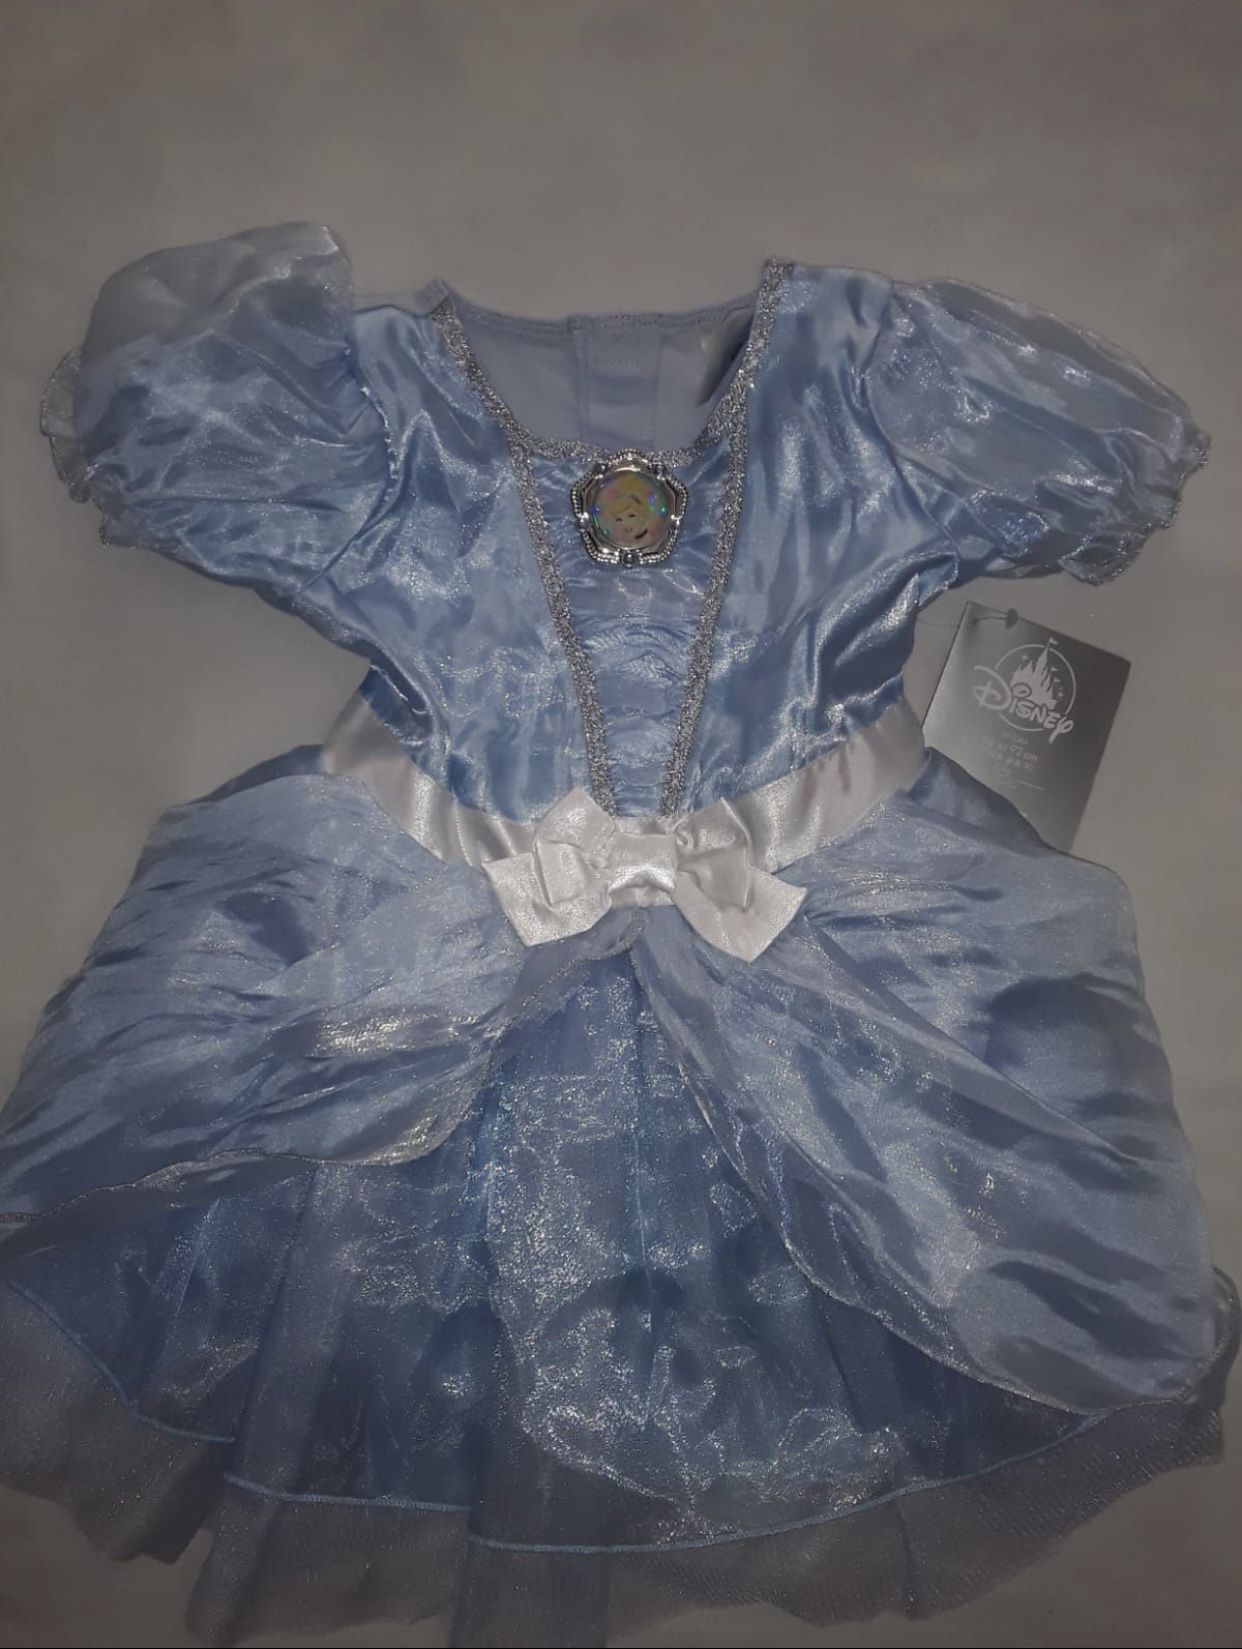 Cinderella Costume Baby Size 3Up To 12Months